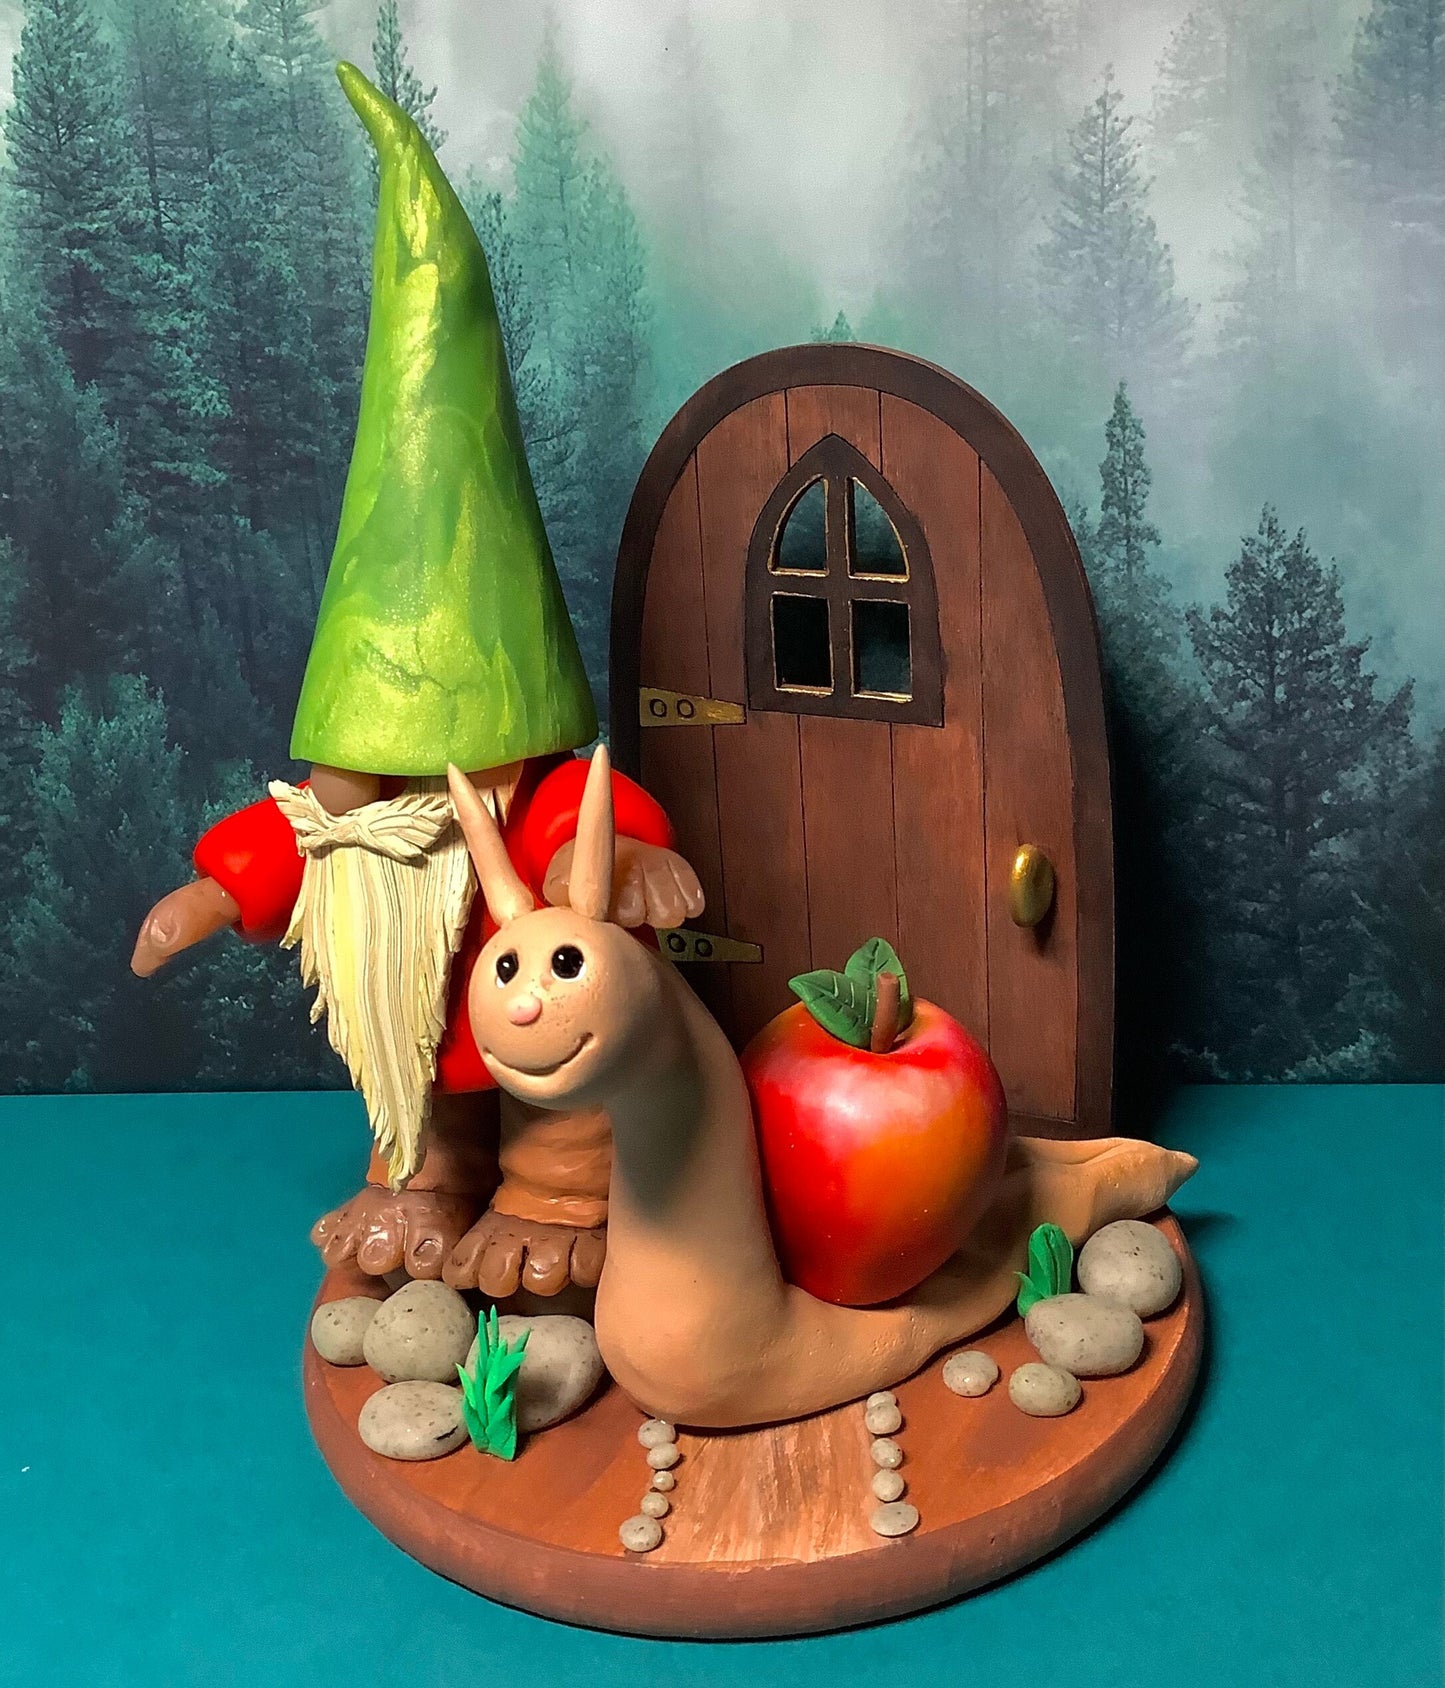 Bearded Gnome & Snail Buddy With Red Apple, Adorable Polymer Clay Figures, Wood Fairy House Door, Wood Base, Clay Stepping Stones